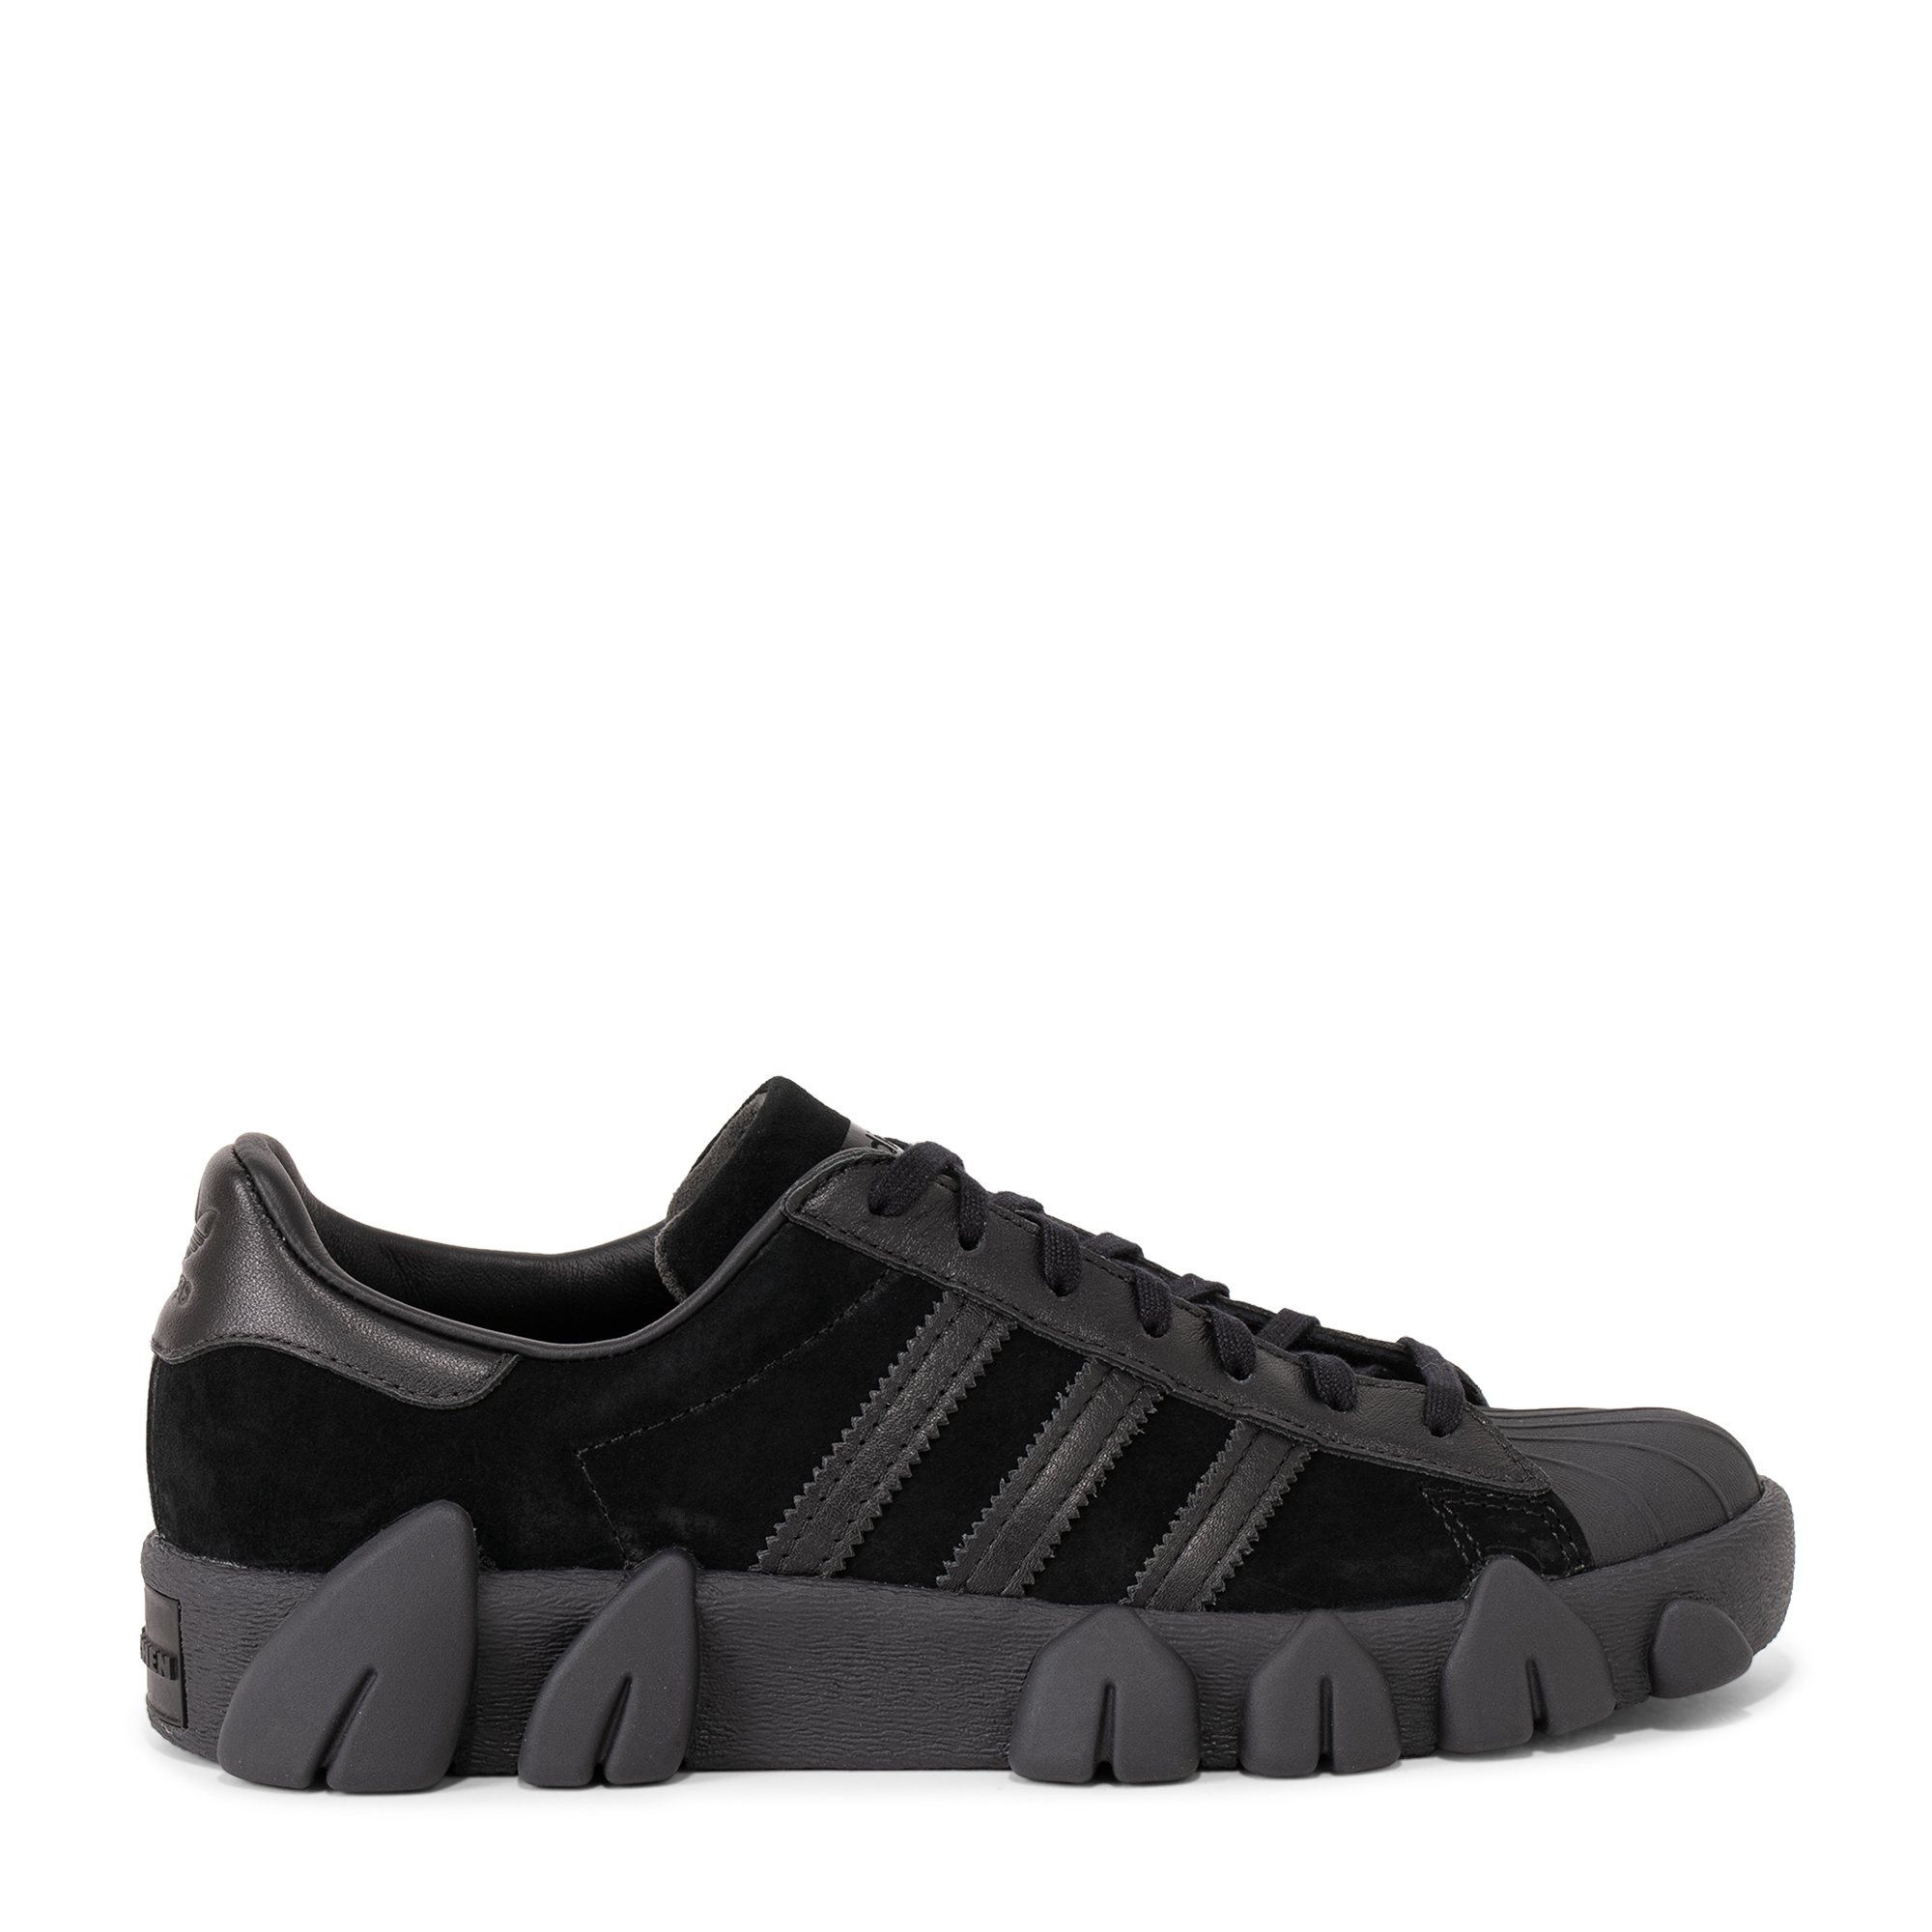 Adidas x Angel Chen Superstar 80s sneakers for Women - Black in 